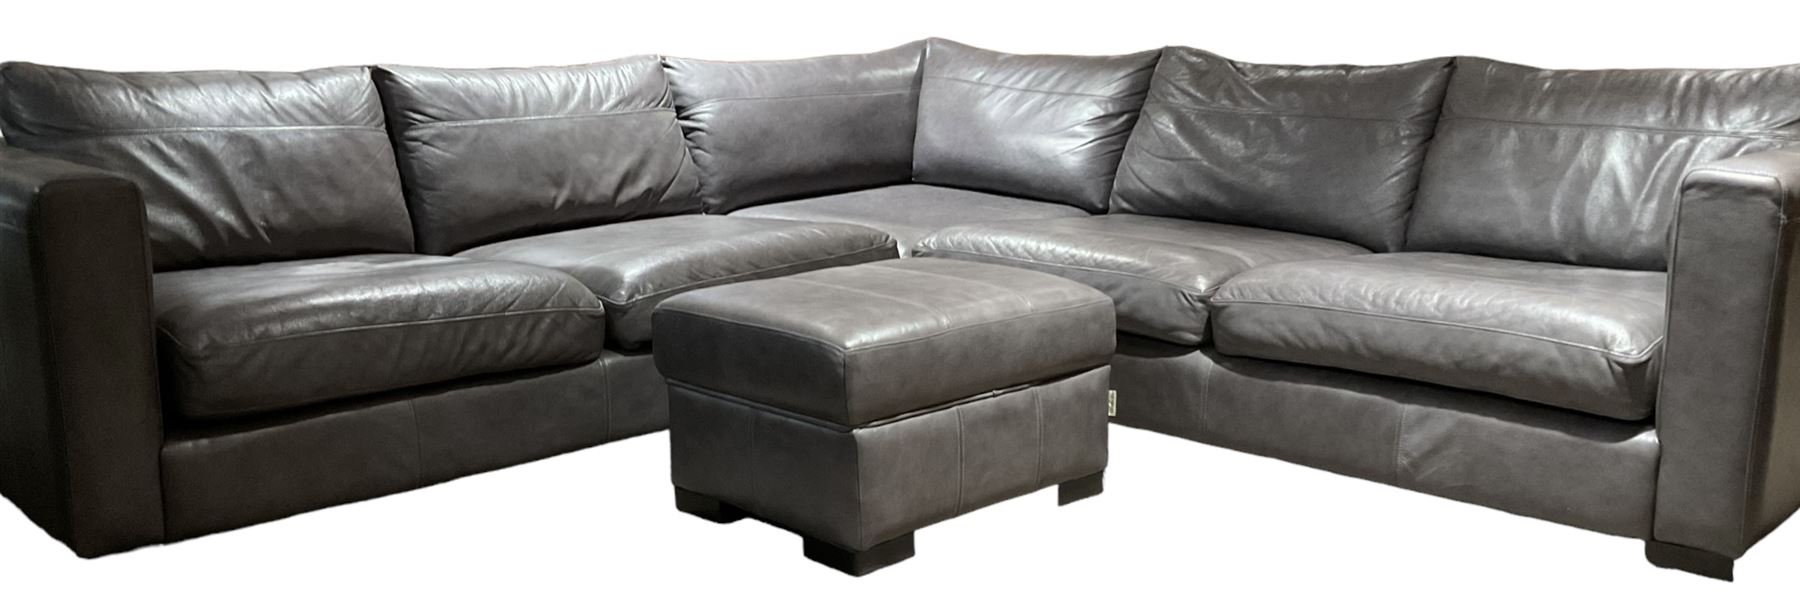 Sofa Workshop - five-seat corner sofa; matching footstool; upholstered in Italian grey leather - Image 7 of 7